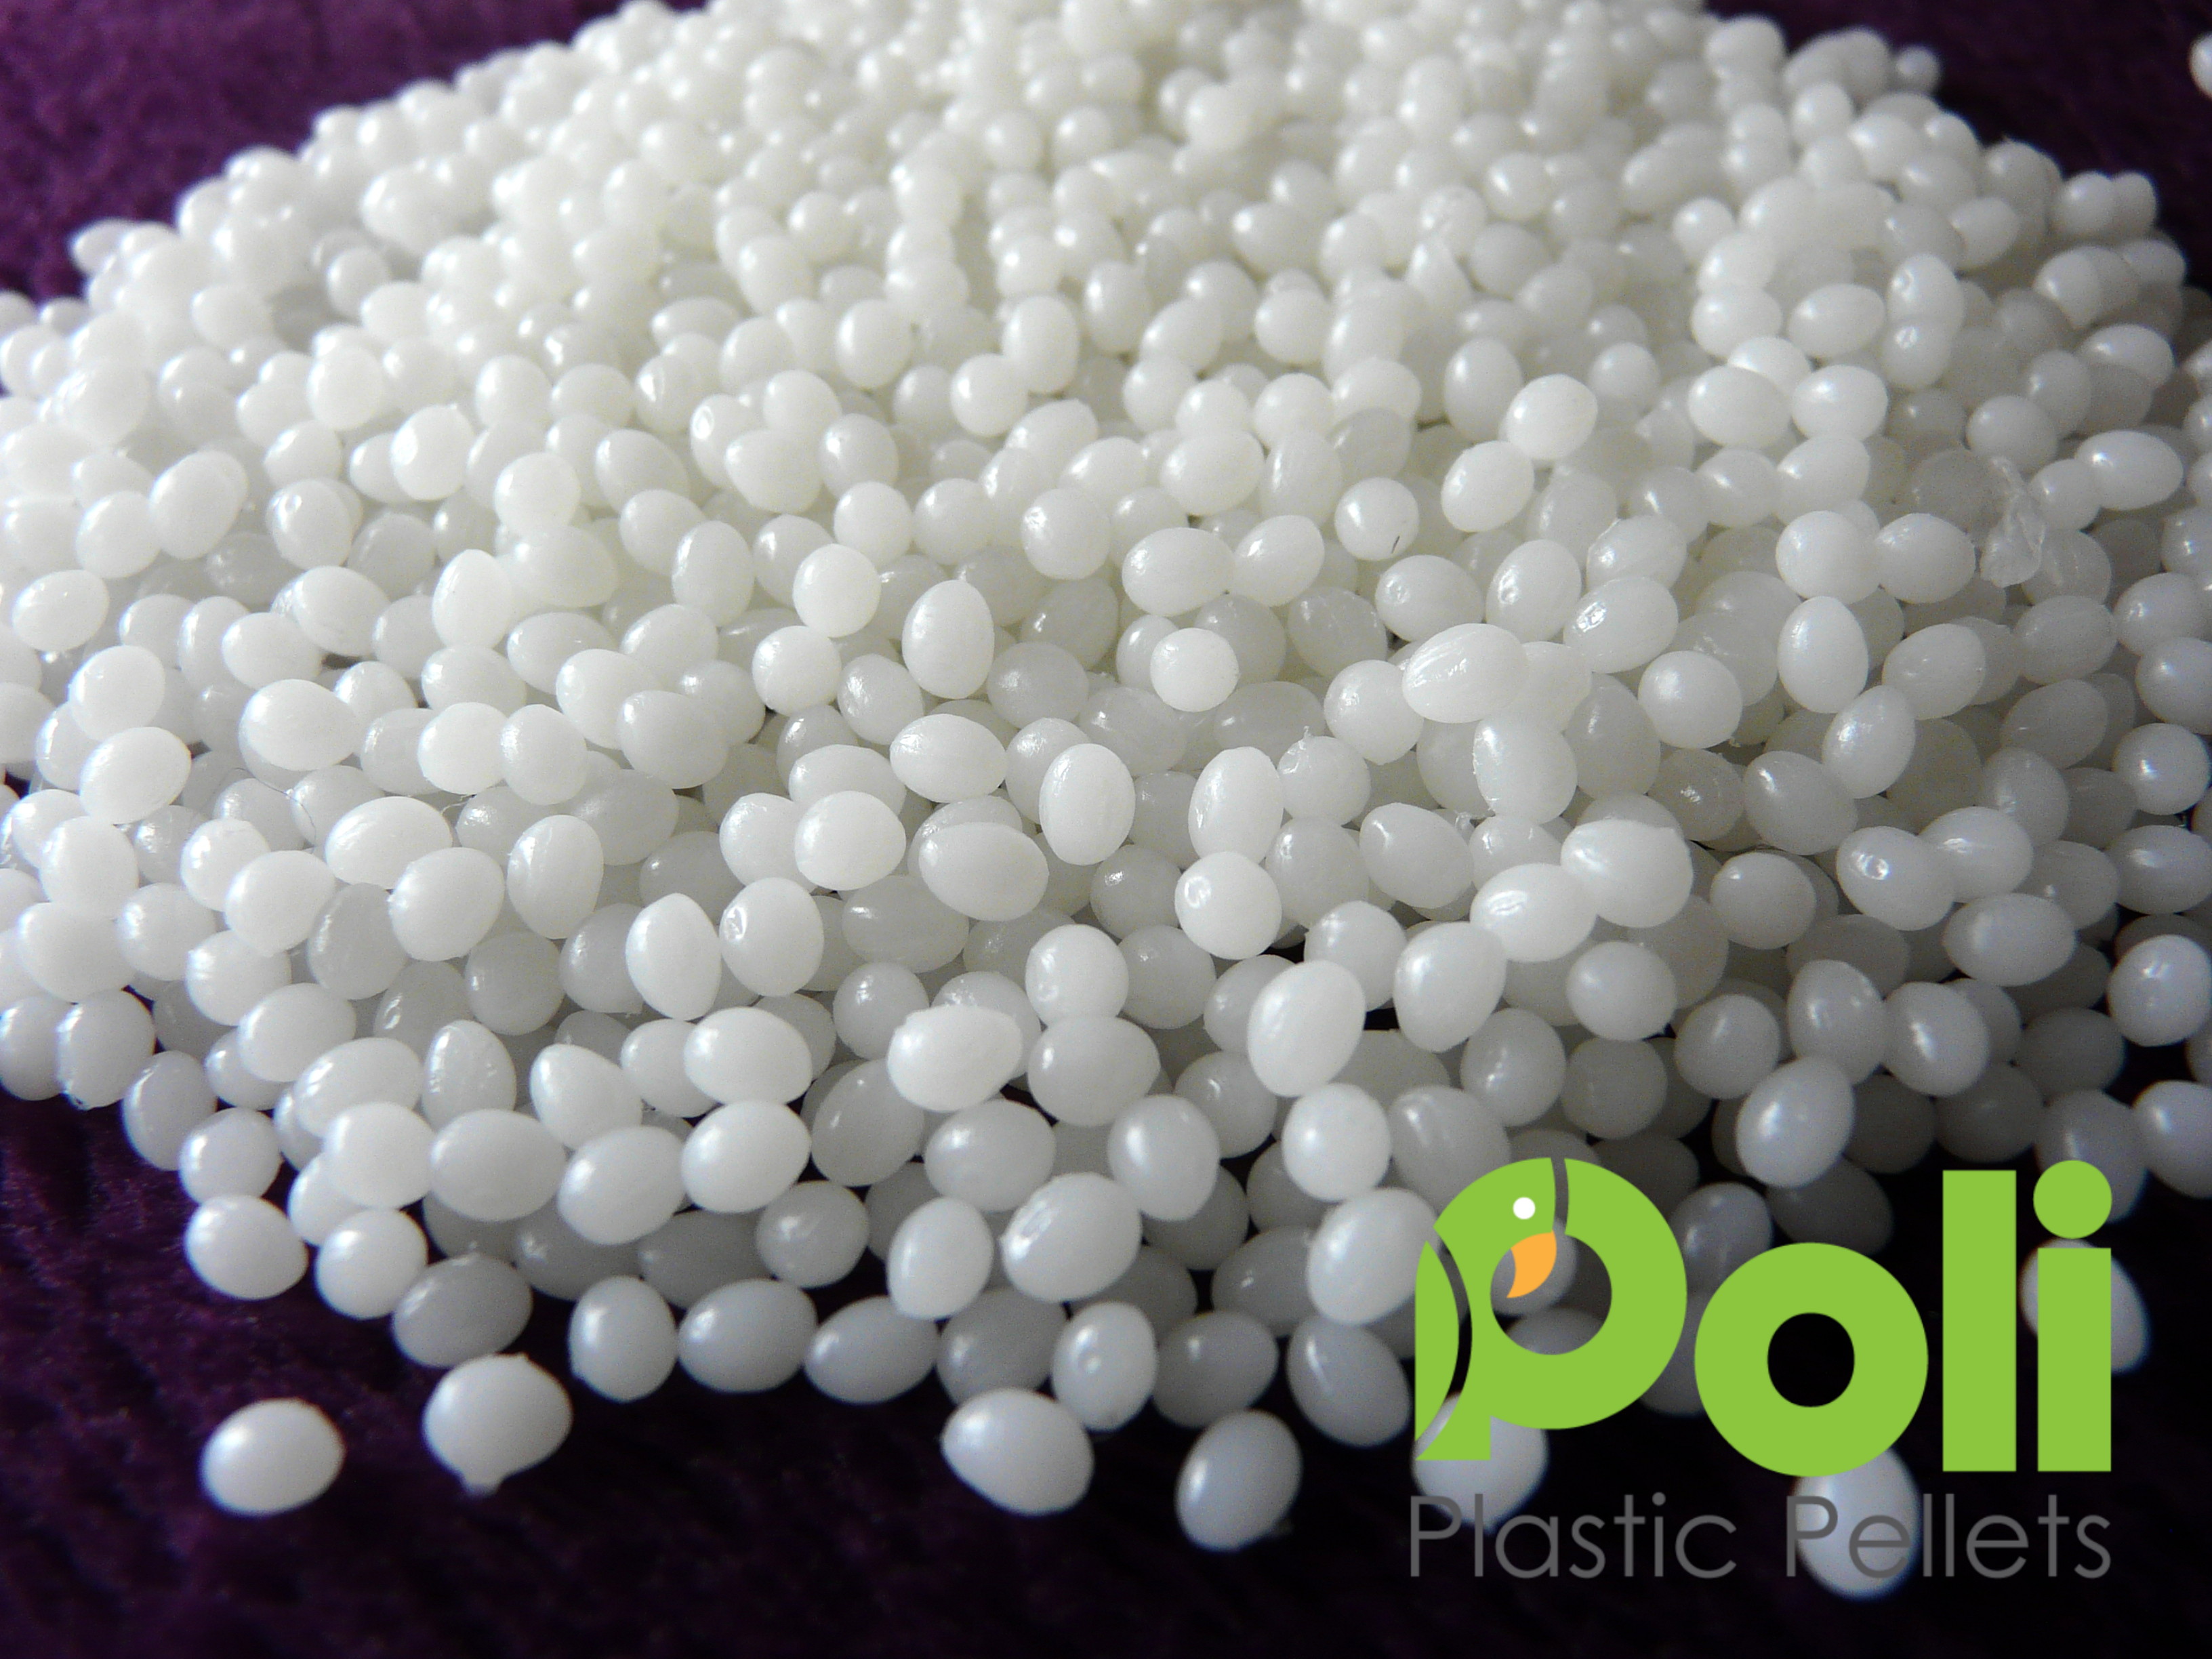 Thermoplastic Beads – 1lb Polymorph Plastic Pellets(Made in Spain) –  Reusable Moldable Plastic Beads – Melting Plastic Pellets for Modeling, DIY